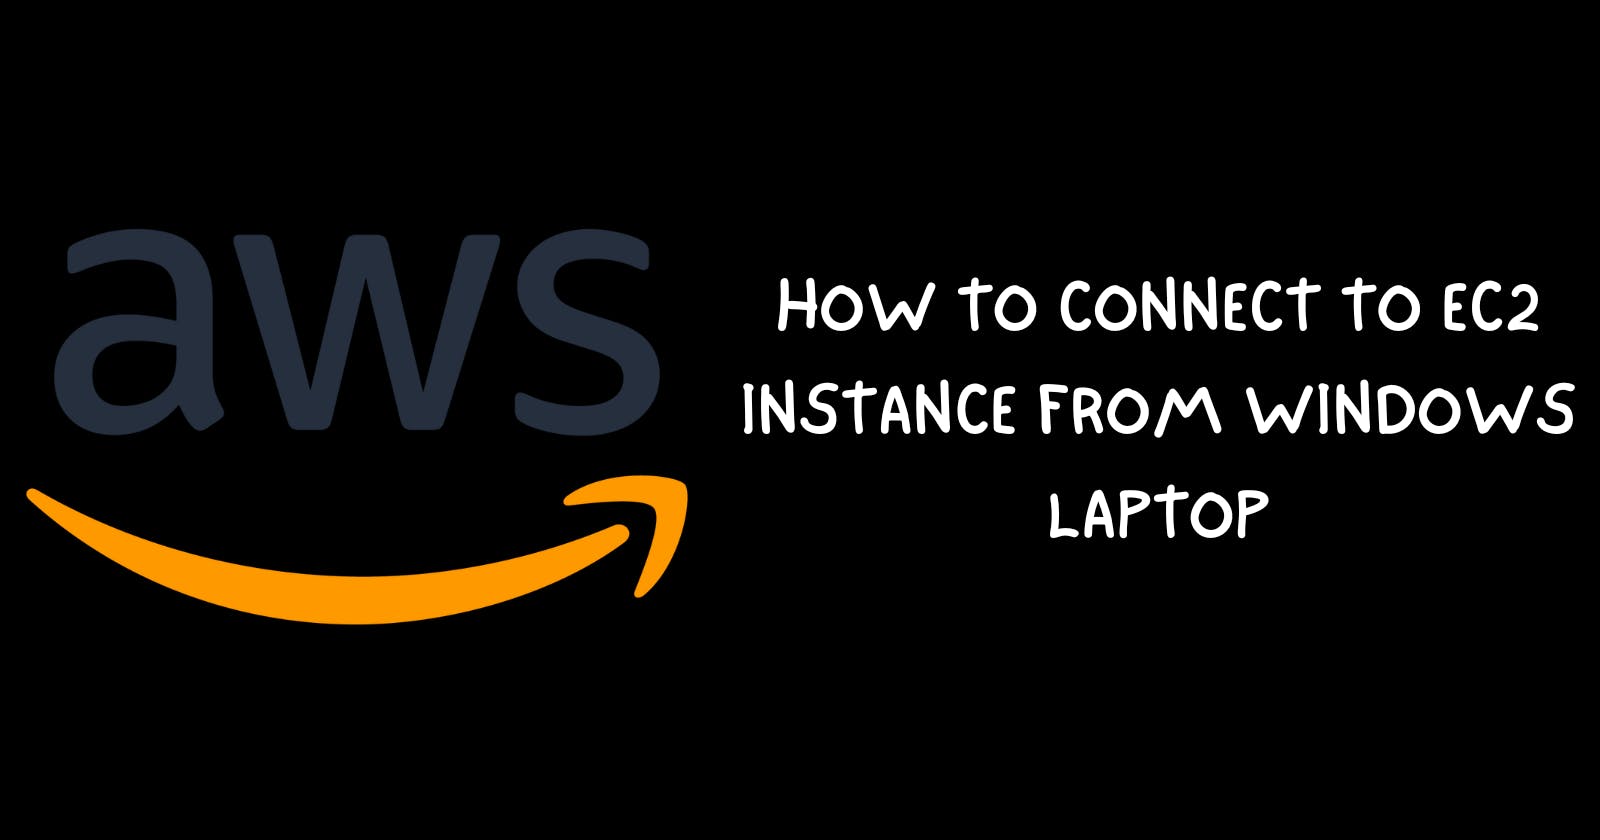 Guide to Connecting to an EC2 Instance in AWS